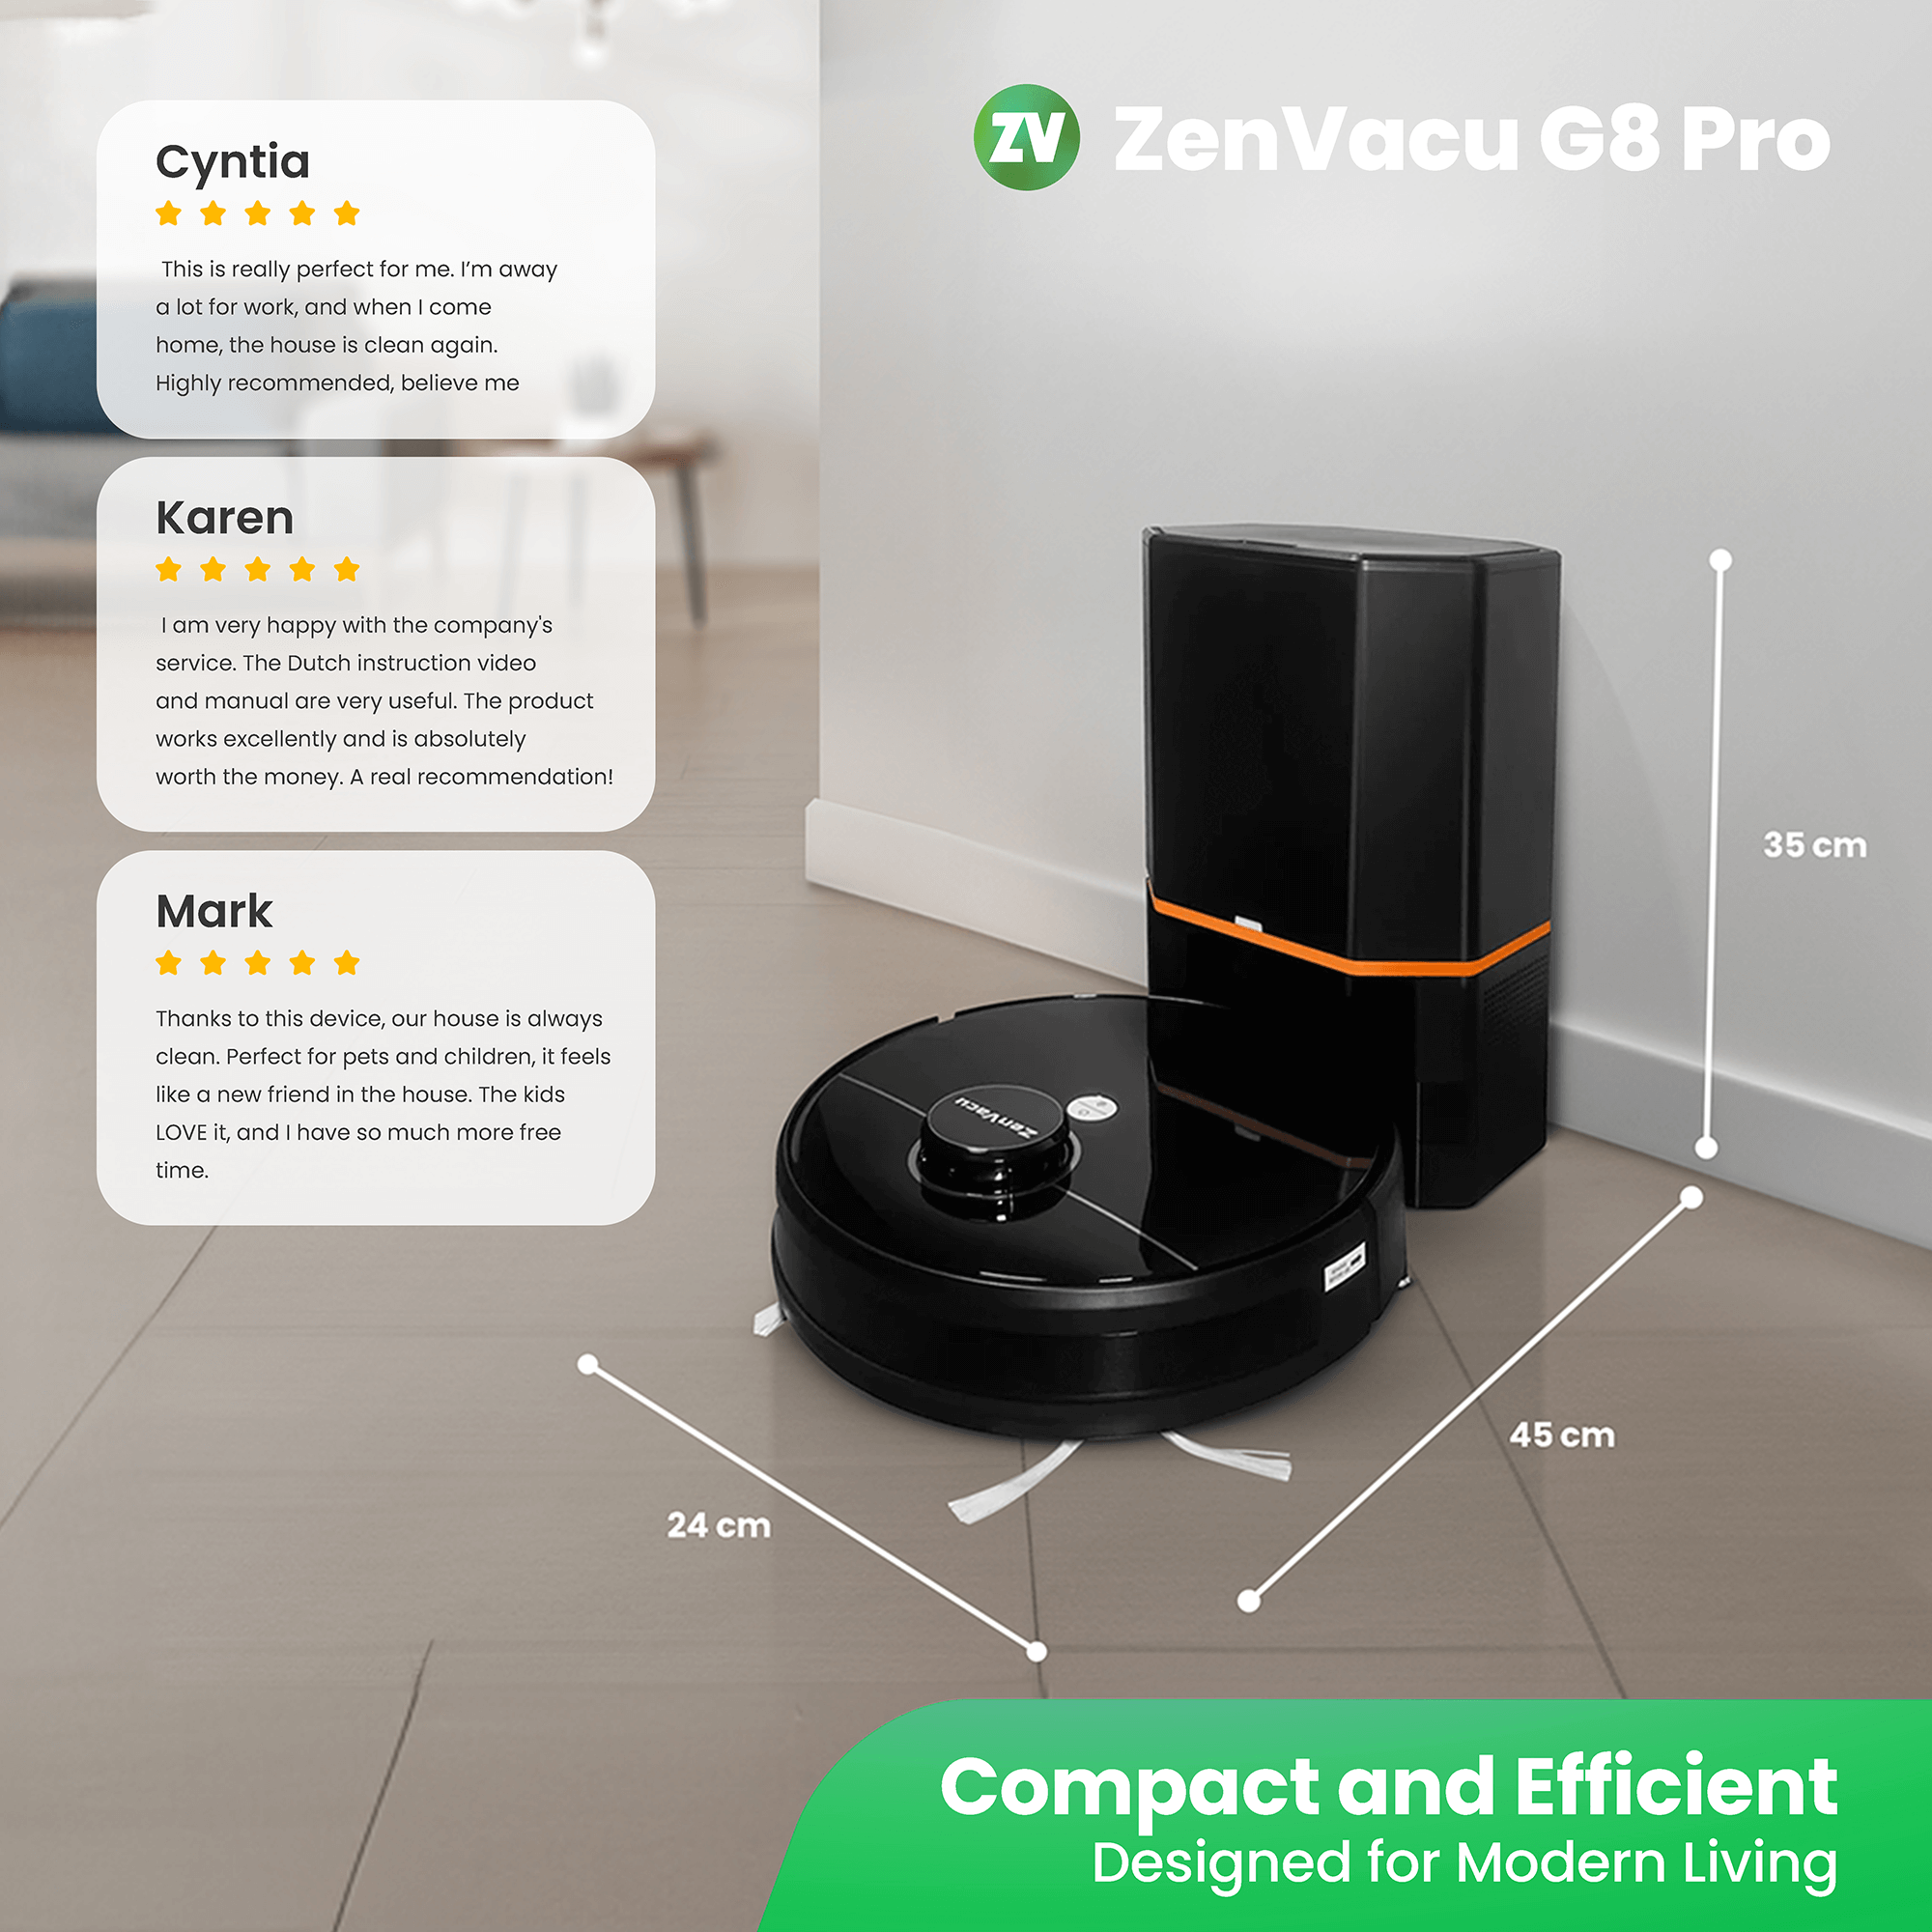 5-Star Reviews for ZenVacu G8 Pro: Perfect for Every Household